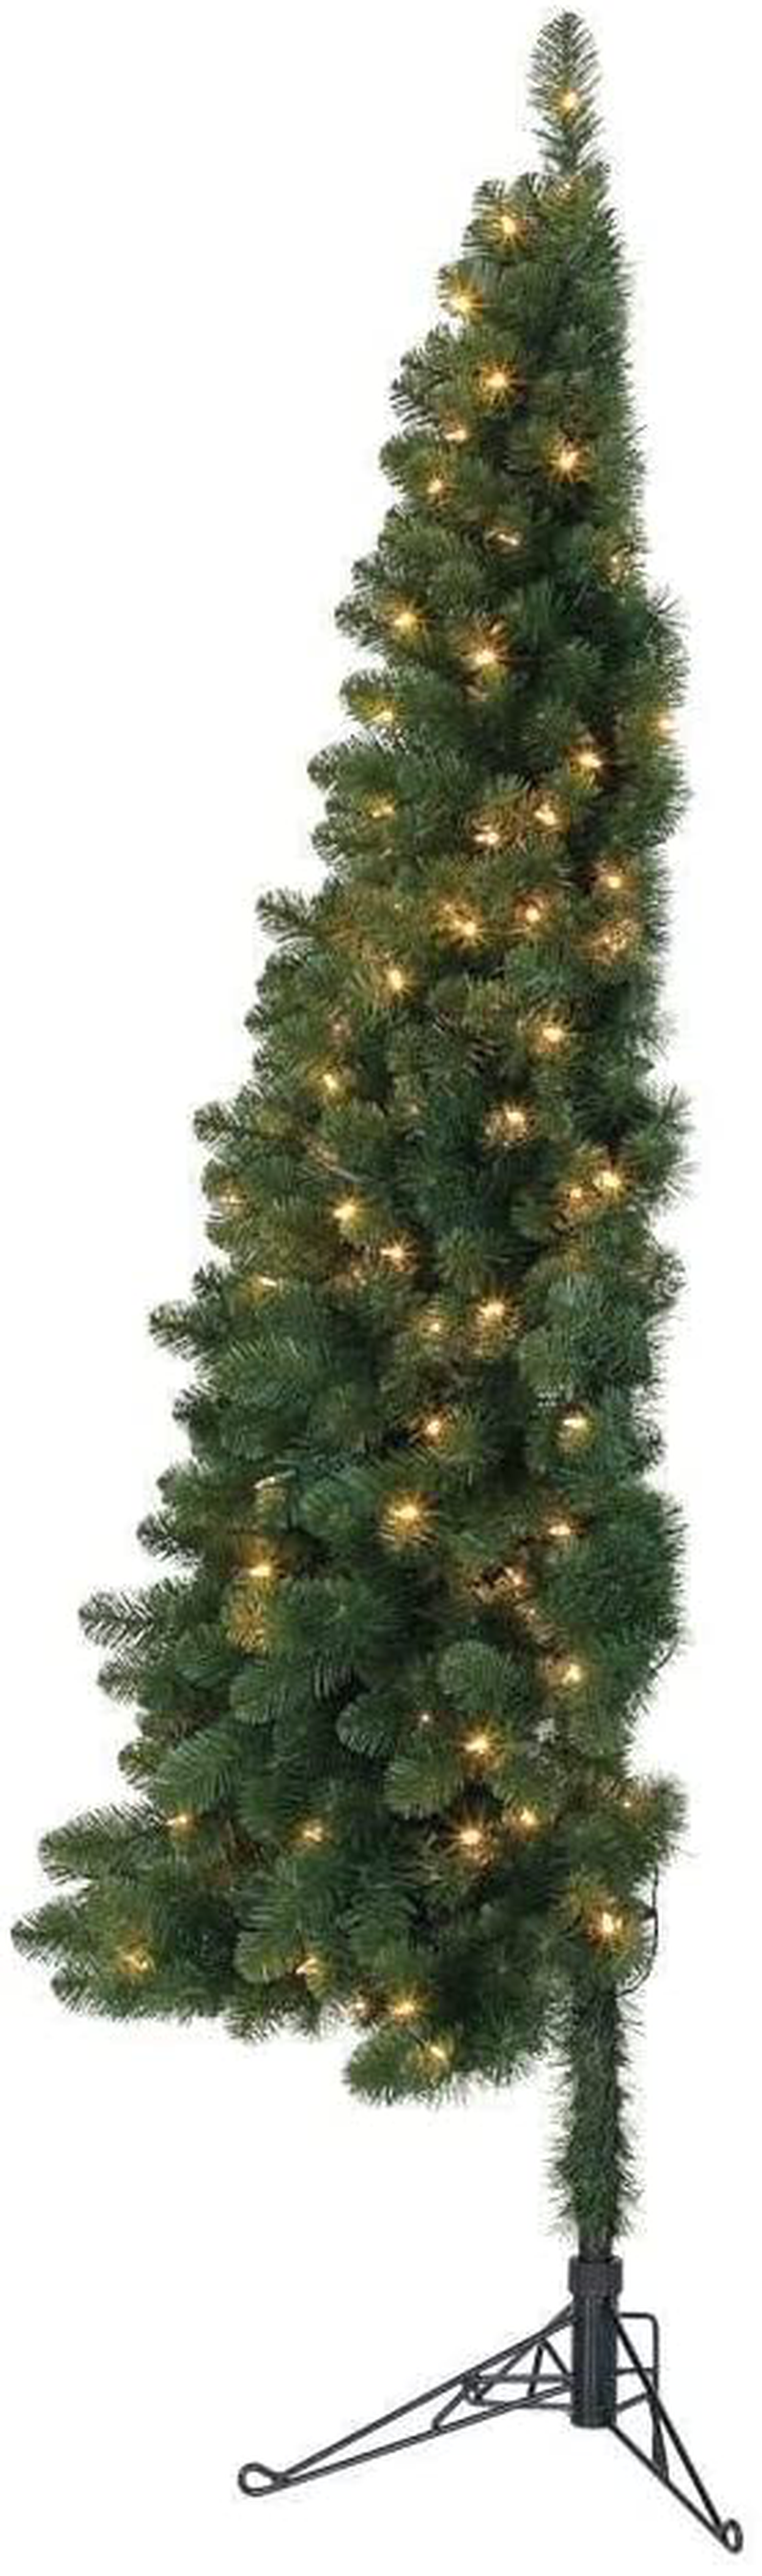 Home Heritage 7 Foot Pre-Lit Artificial Half Pine Christmas Tree with Warm White LED Lights and Folding Stand Home & Garden > Decor > Seasonal & Holiday Decorations > Christmas Tree Stands Home Heritage 7-foot  